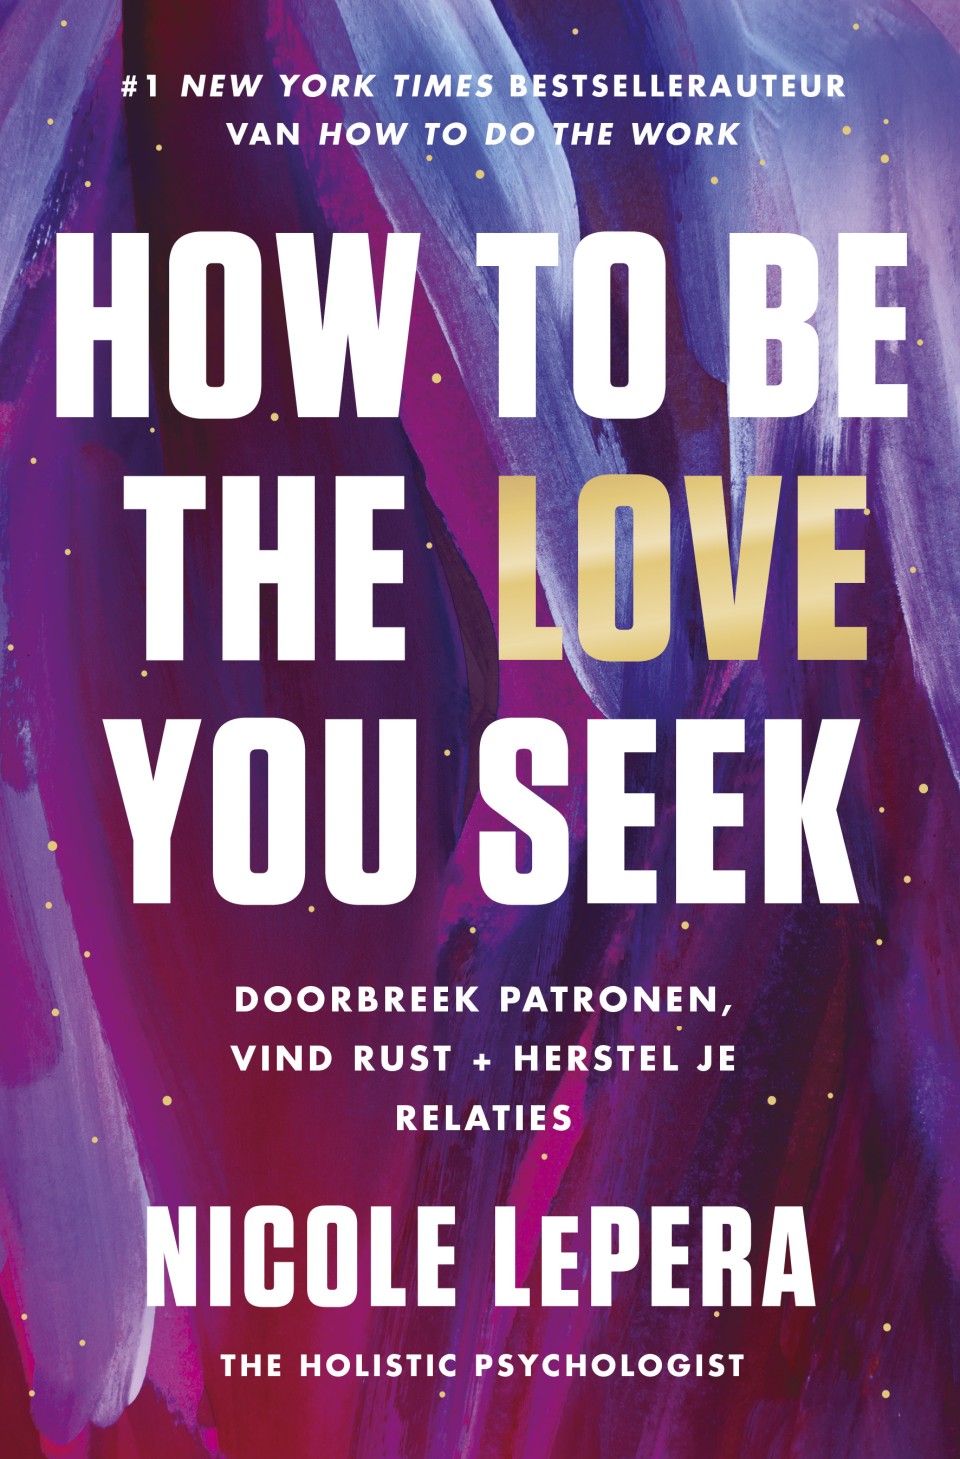 How to be the love you seek